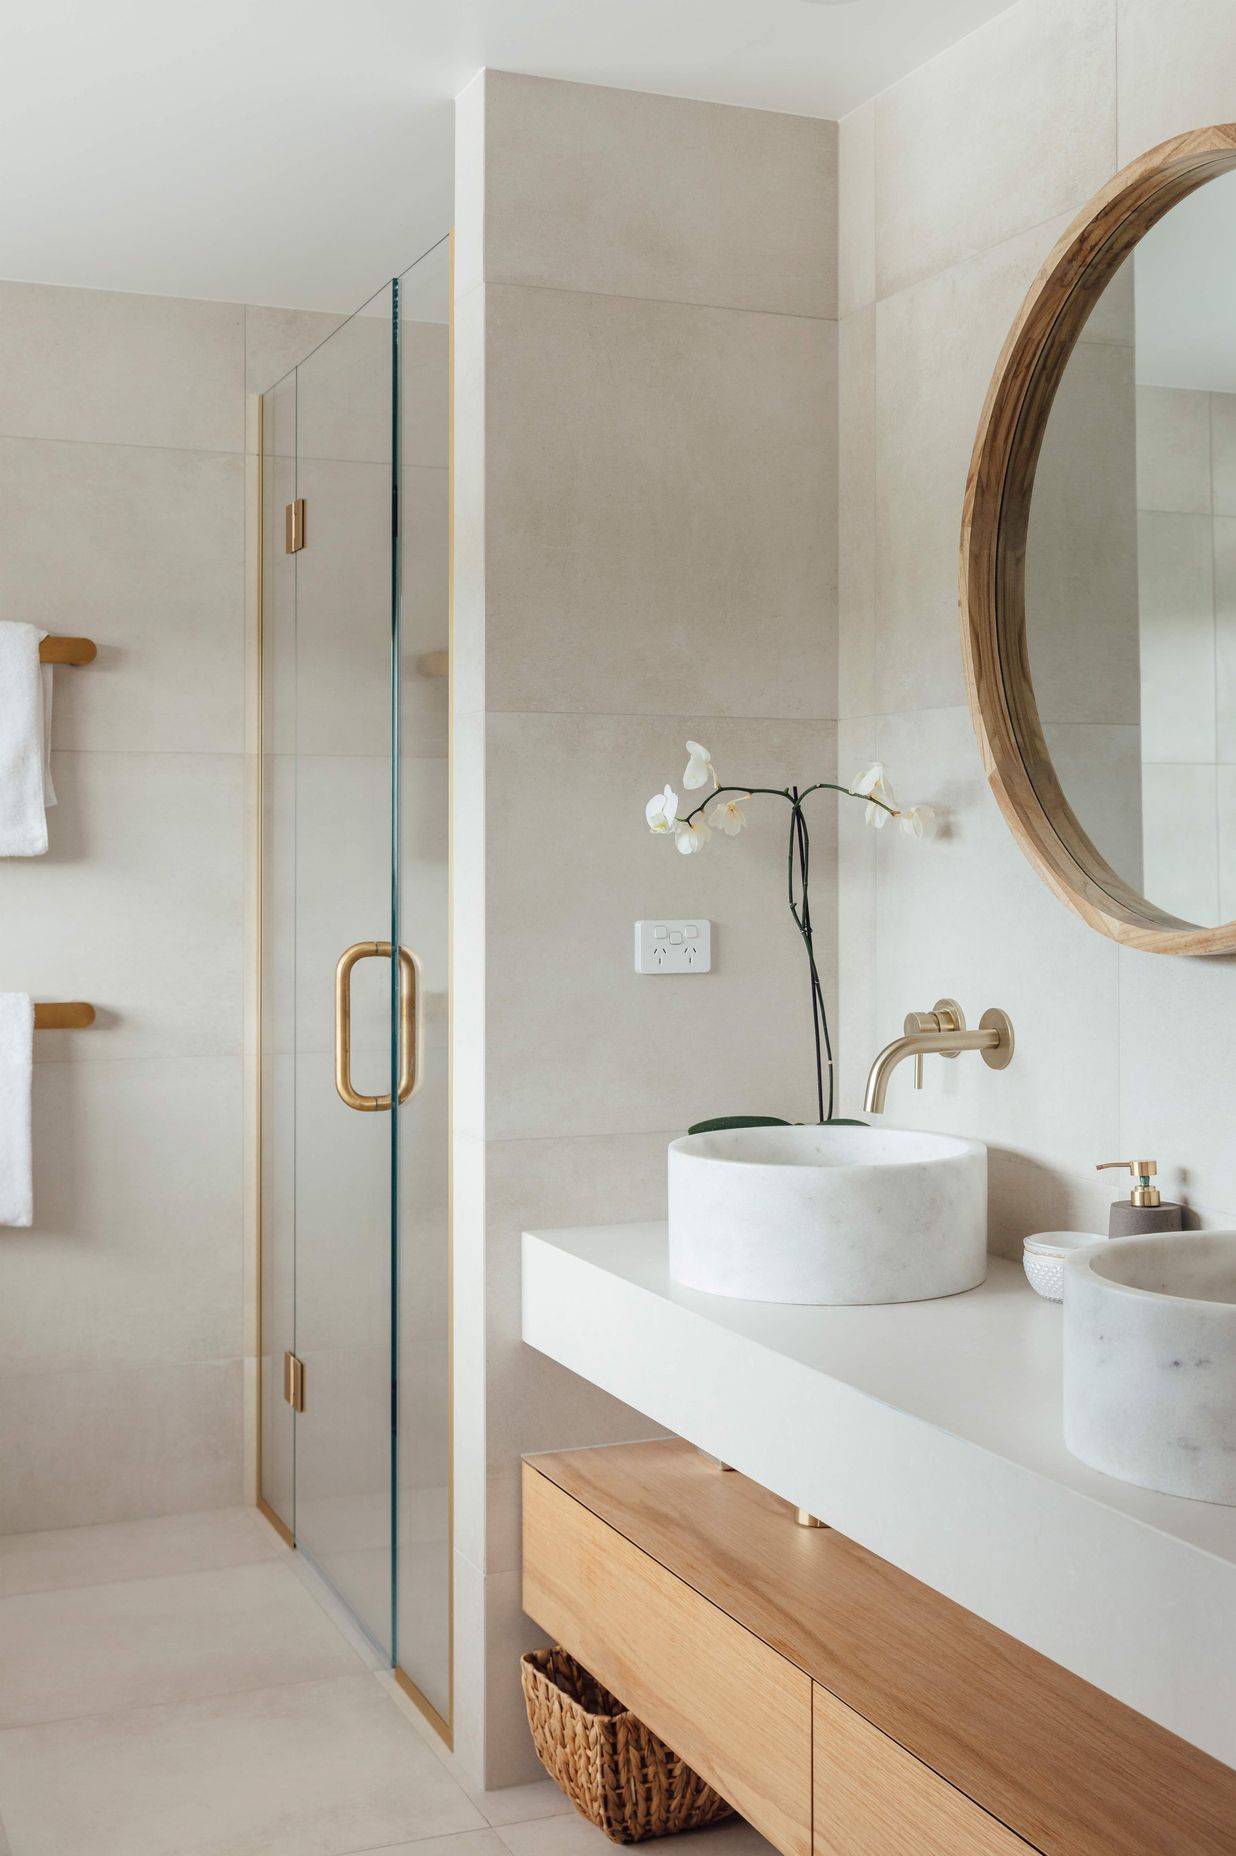 The main en suite bathroom continues the pared-back palette of muted tones and timbers.